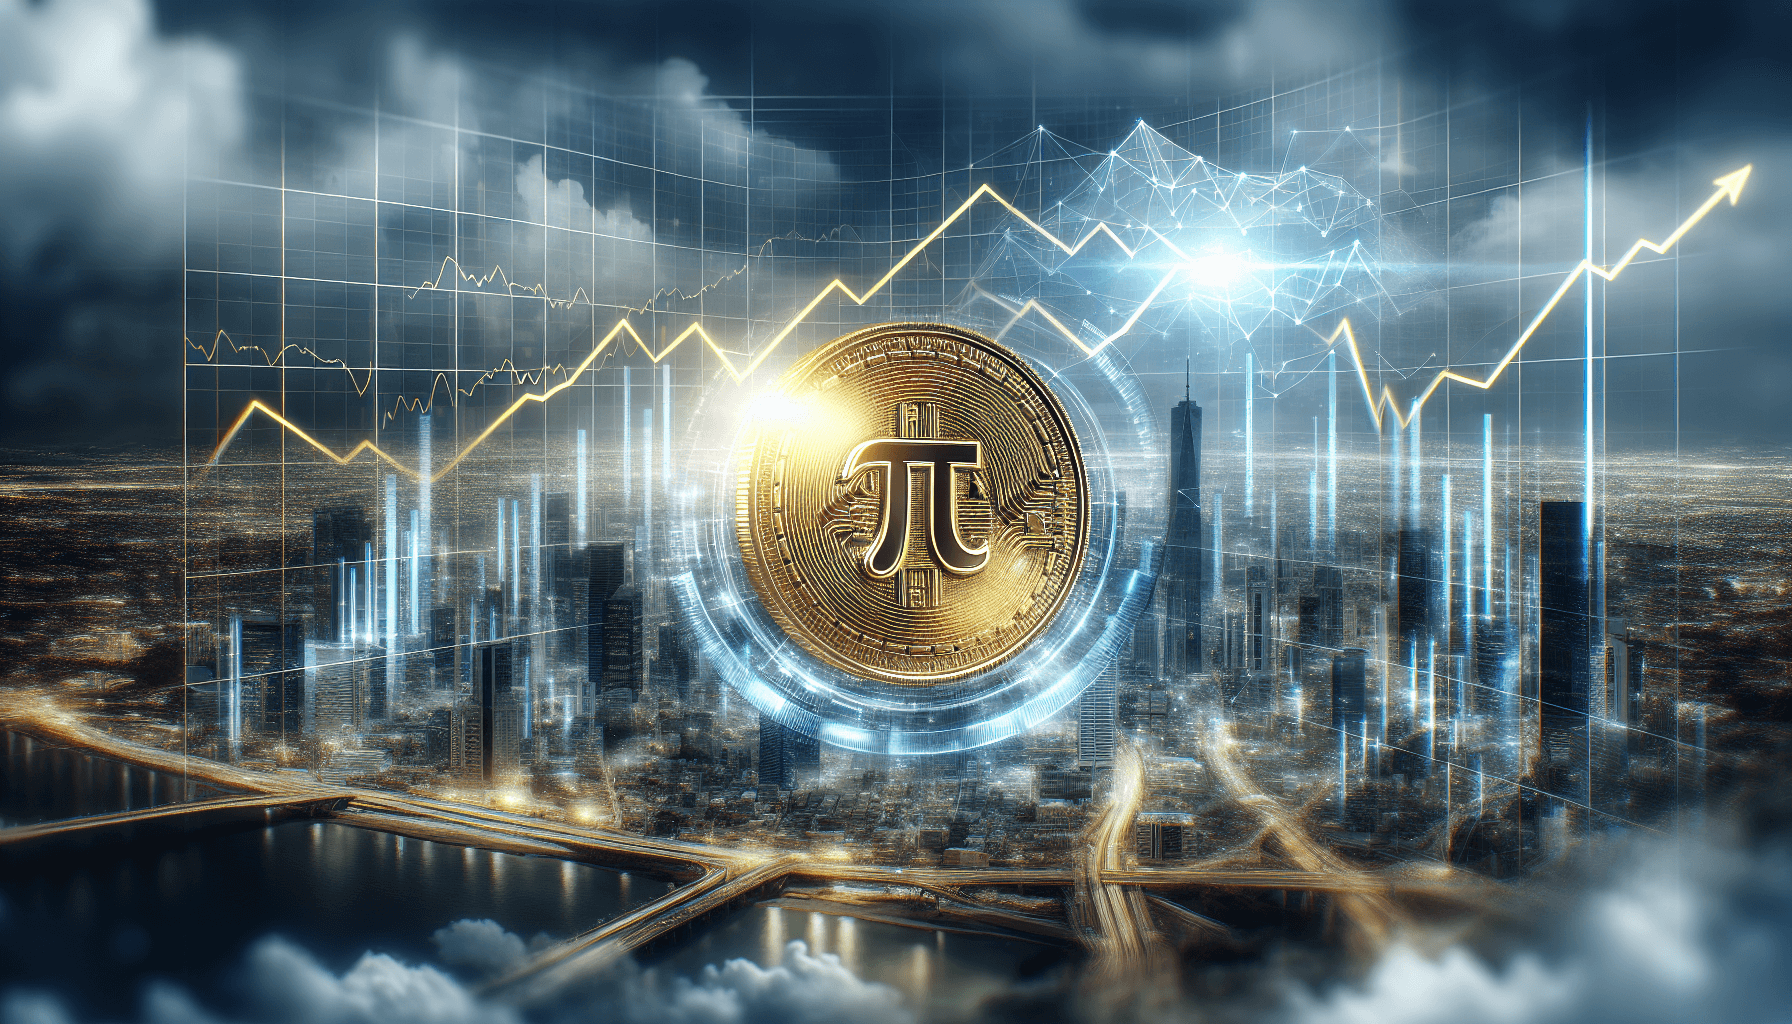 Pi Coin Price Predictions: Short-term and Long-term Outlook